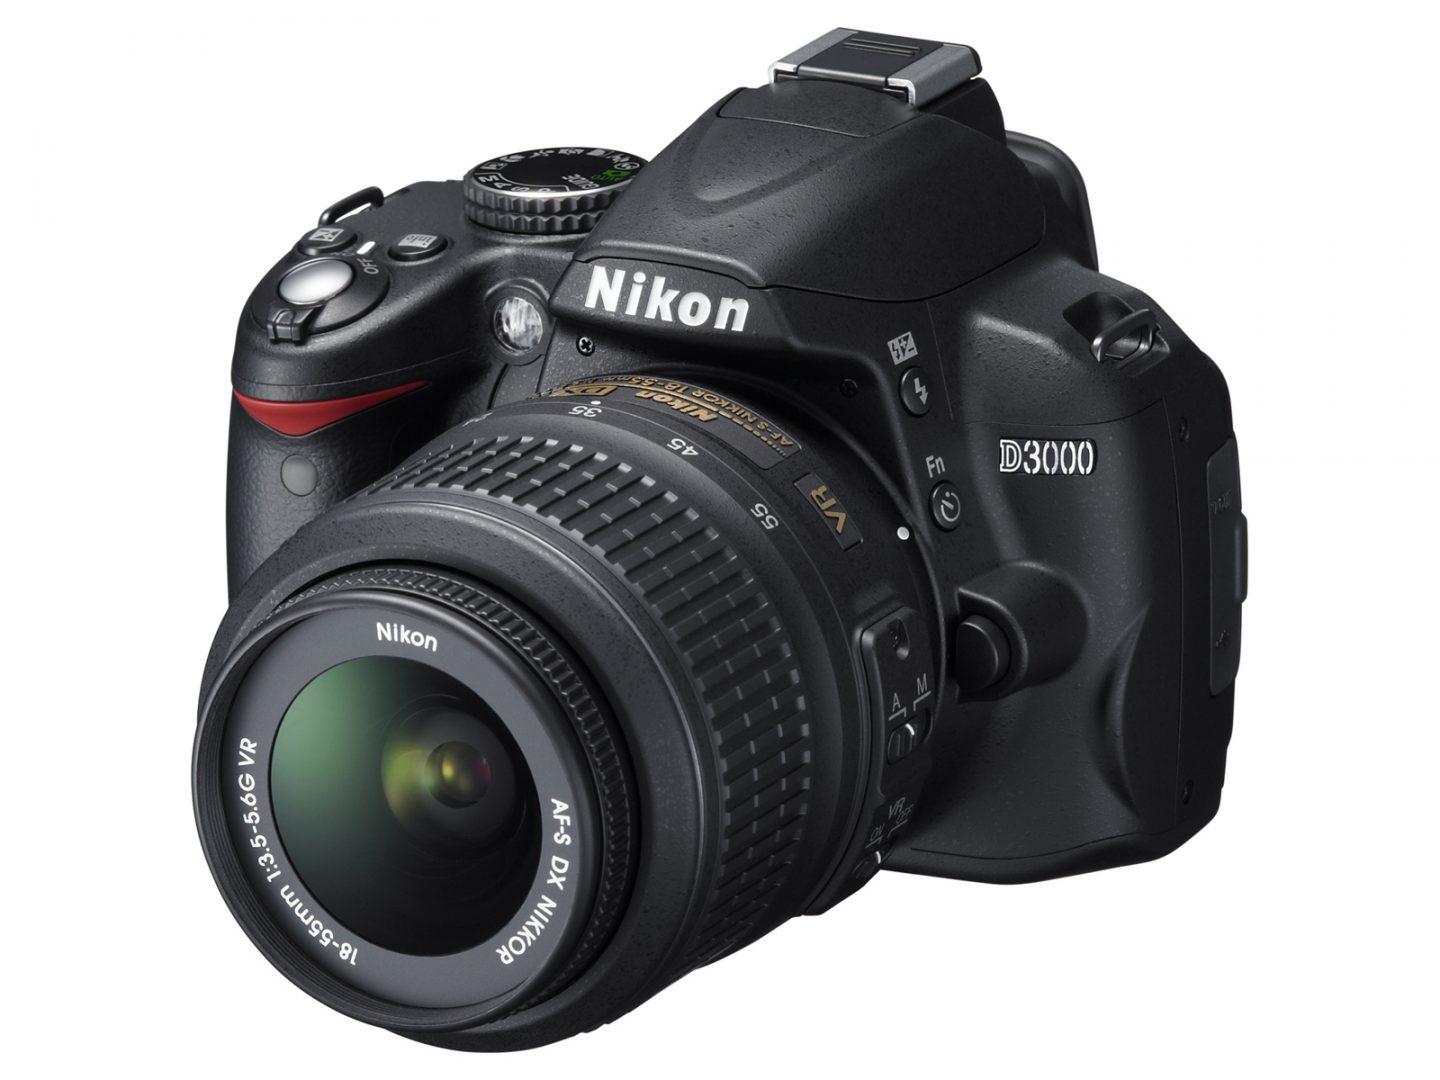 The Nikon D3000, a 10.2-megapixel DSLR, is the perfect entry-level camera for those who want something more powerful than a simple point-and-shoot. (Nikon/MCT)